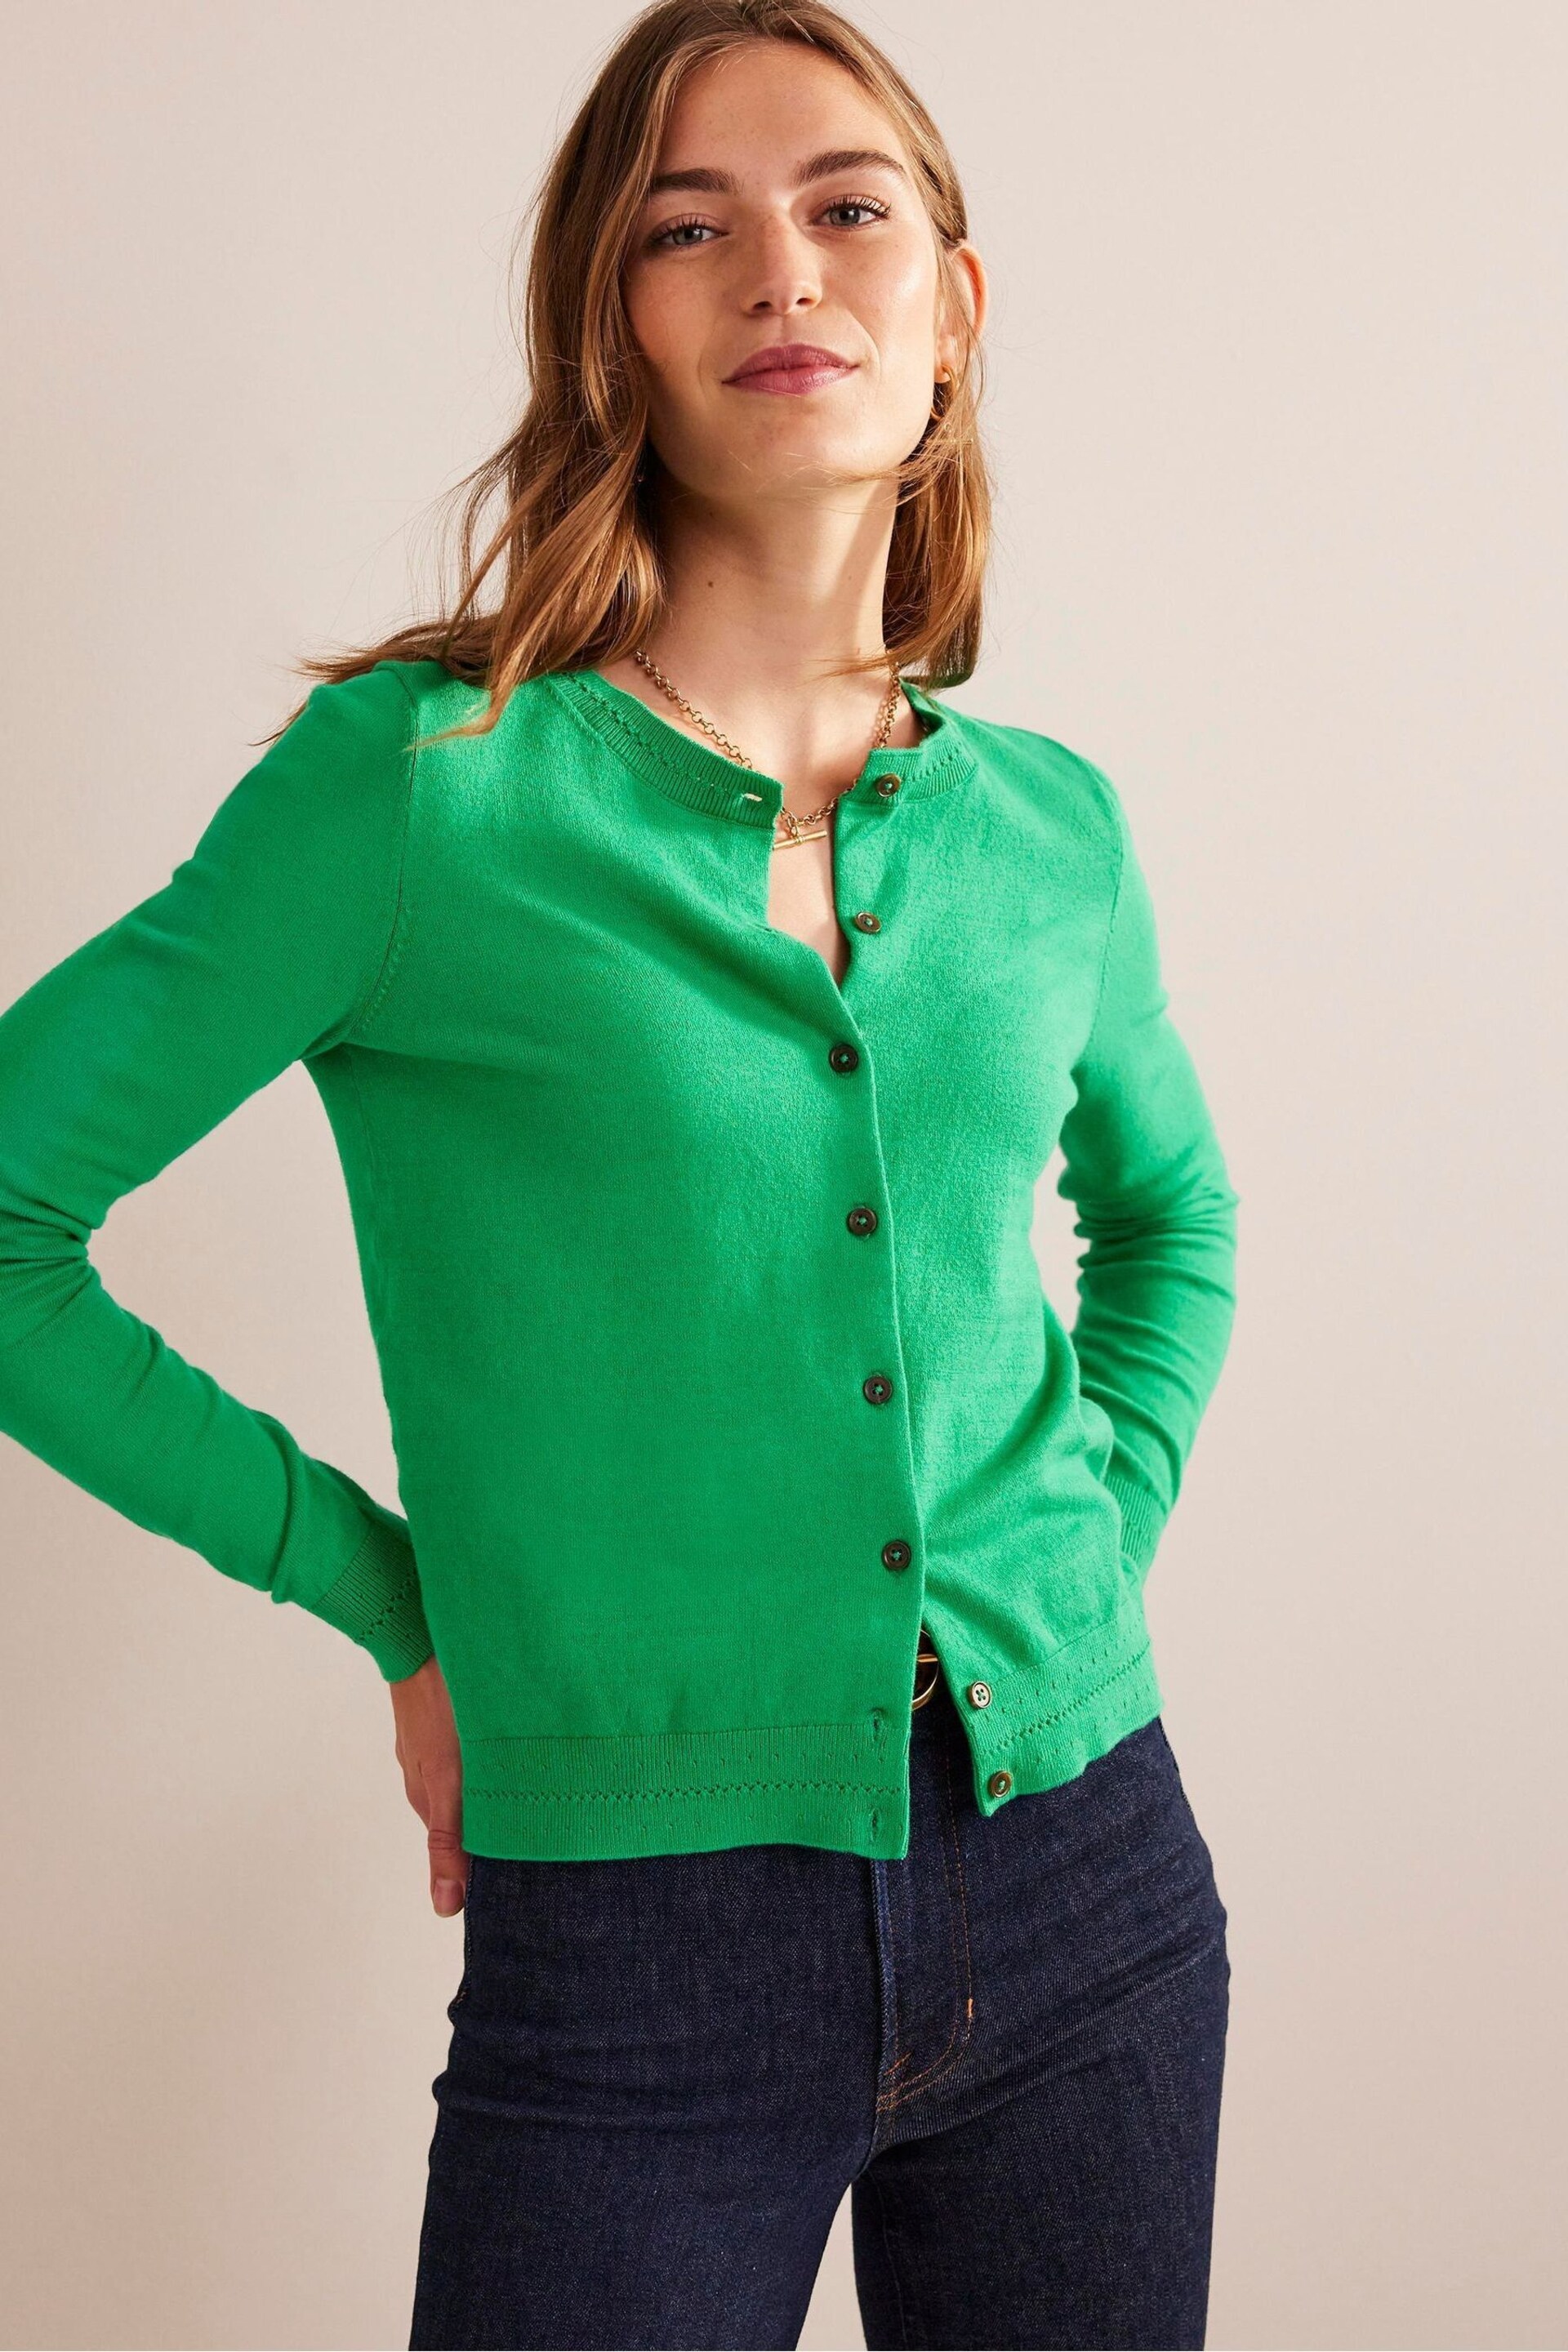 Boden Green Catriona Cotton Cardigan - Image 1 of 6